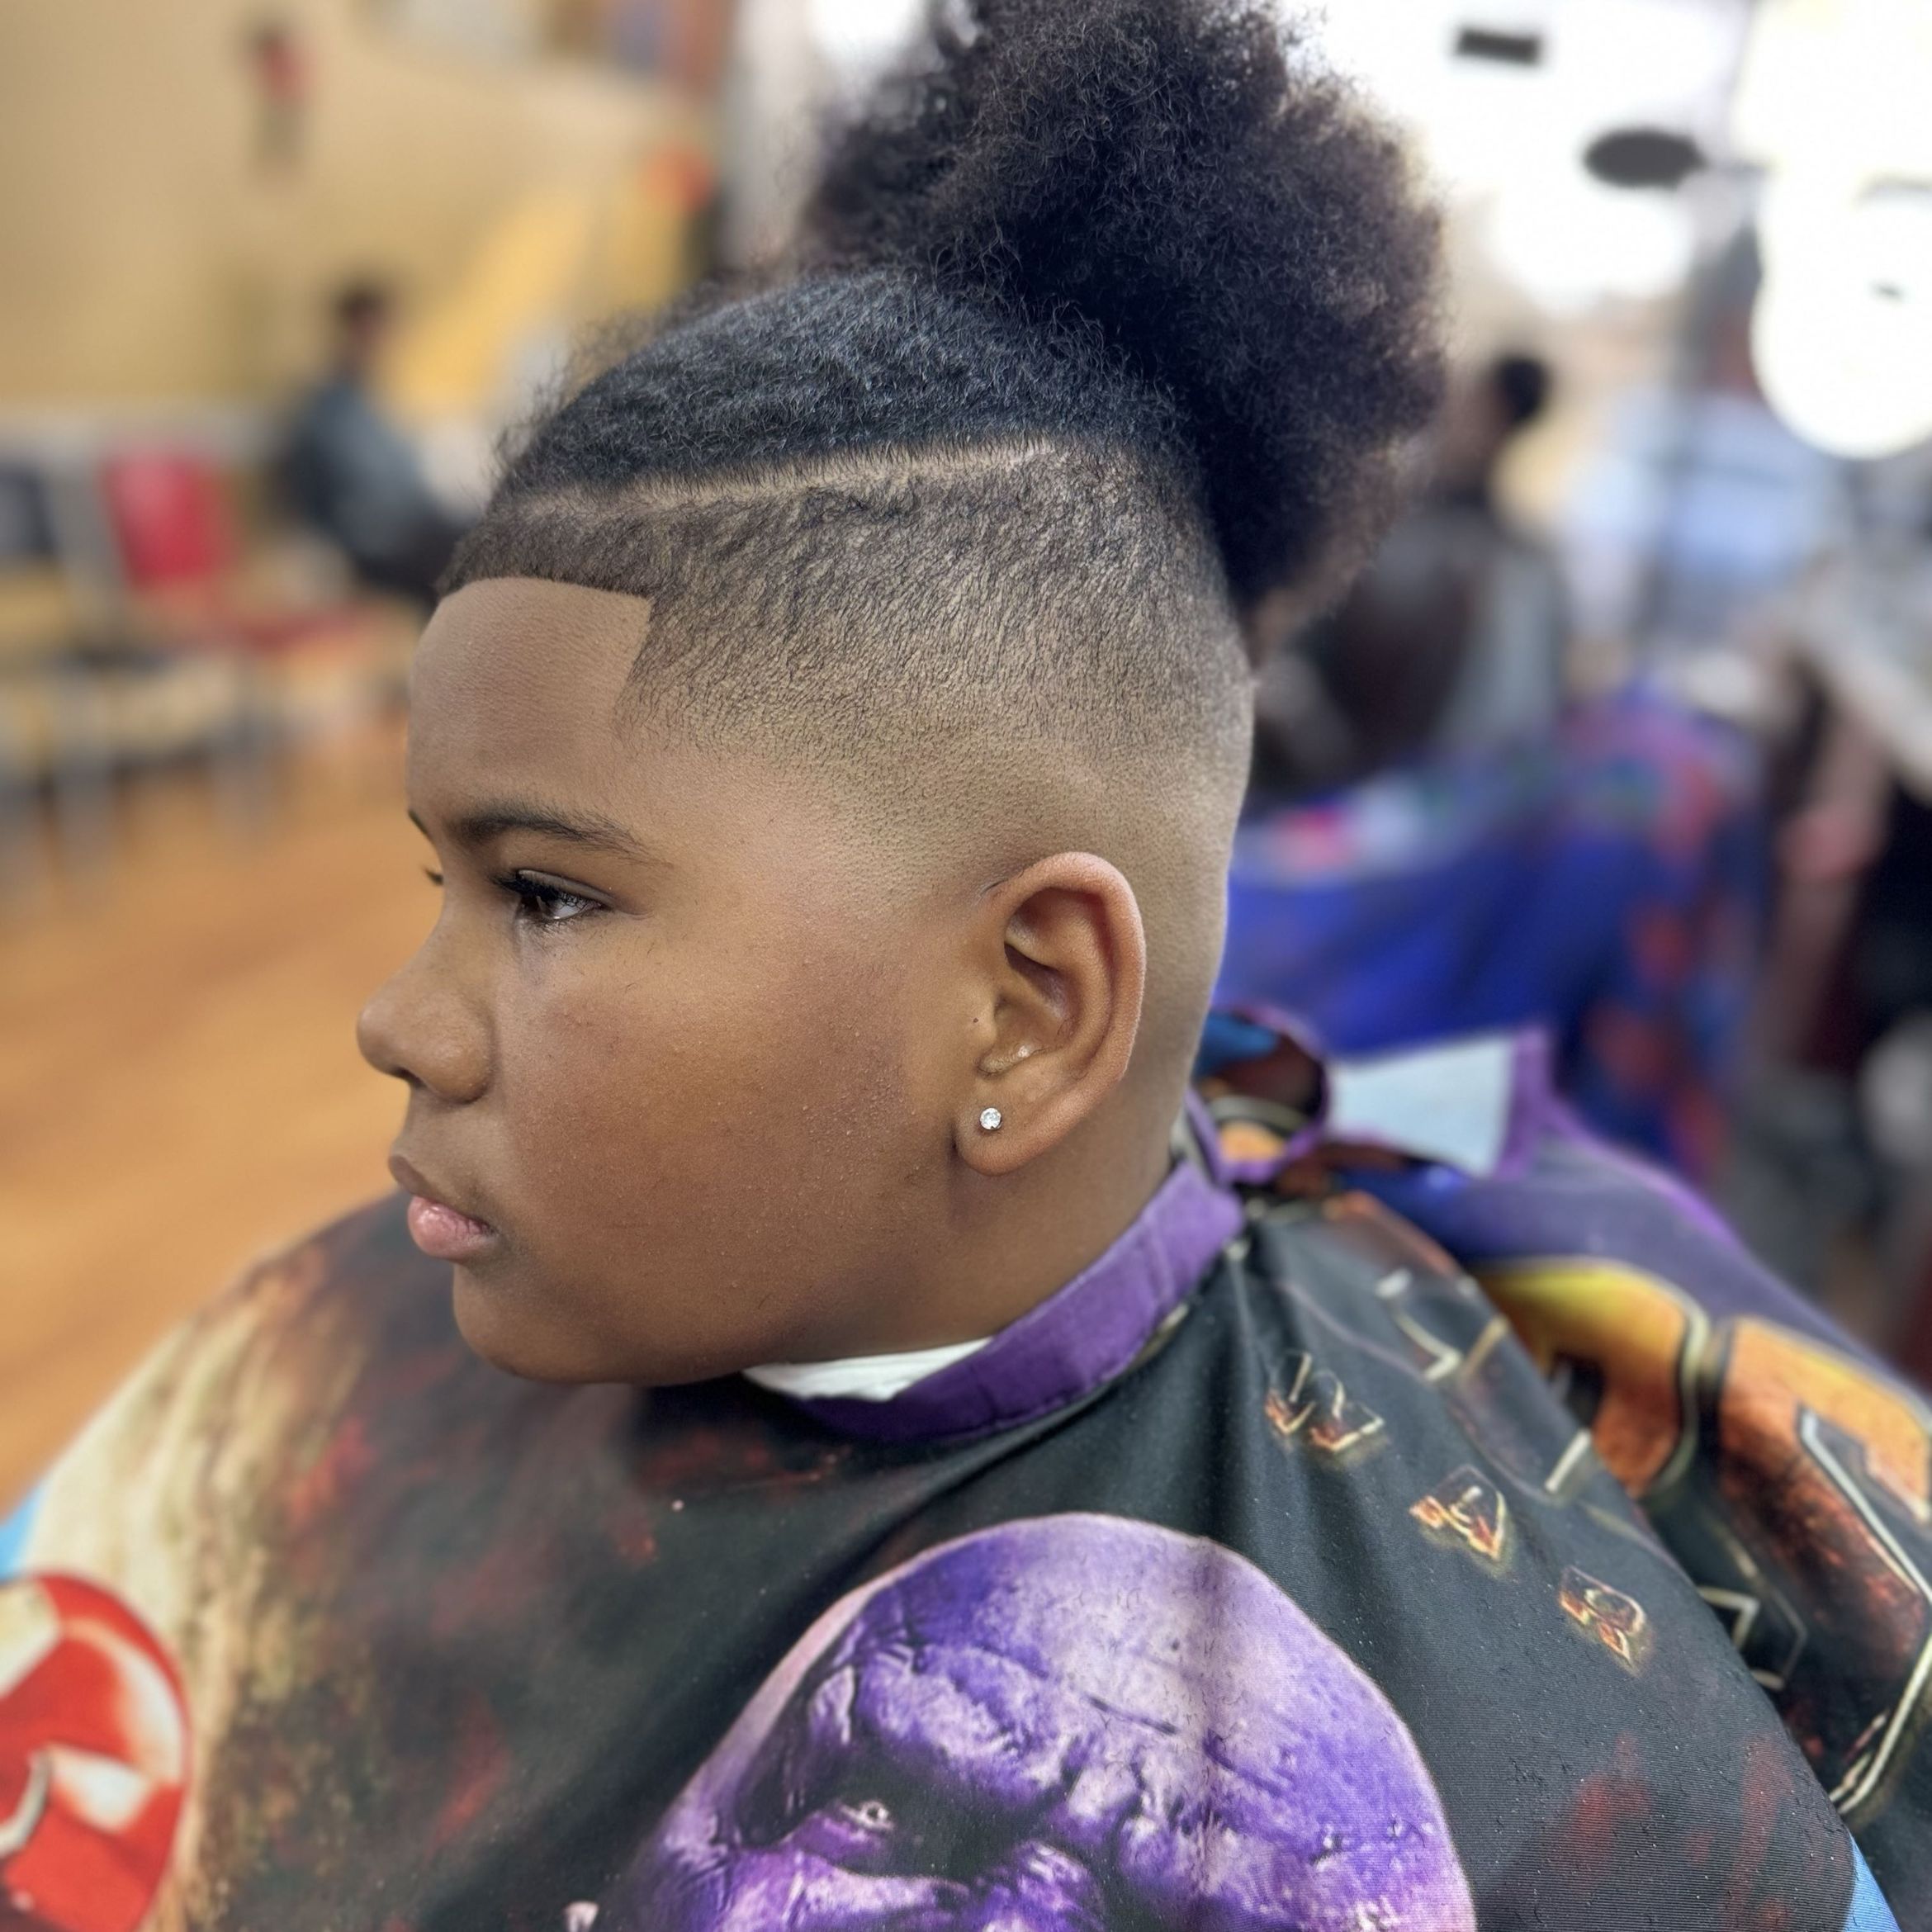 Youth Haircut(ages 5-12) No new kids under 5 portfolio